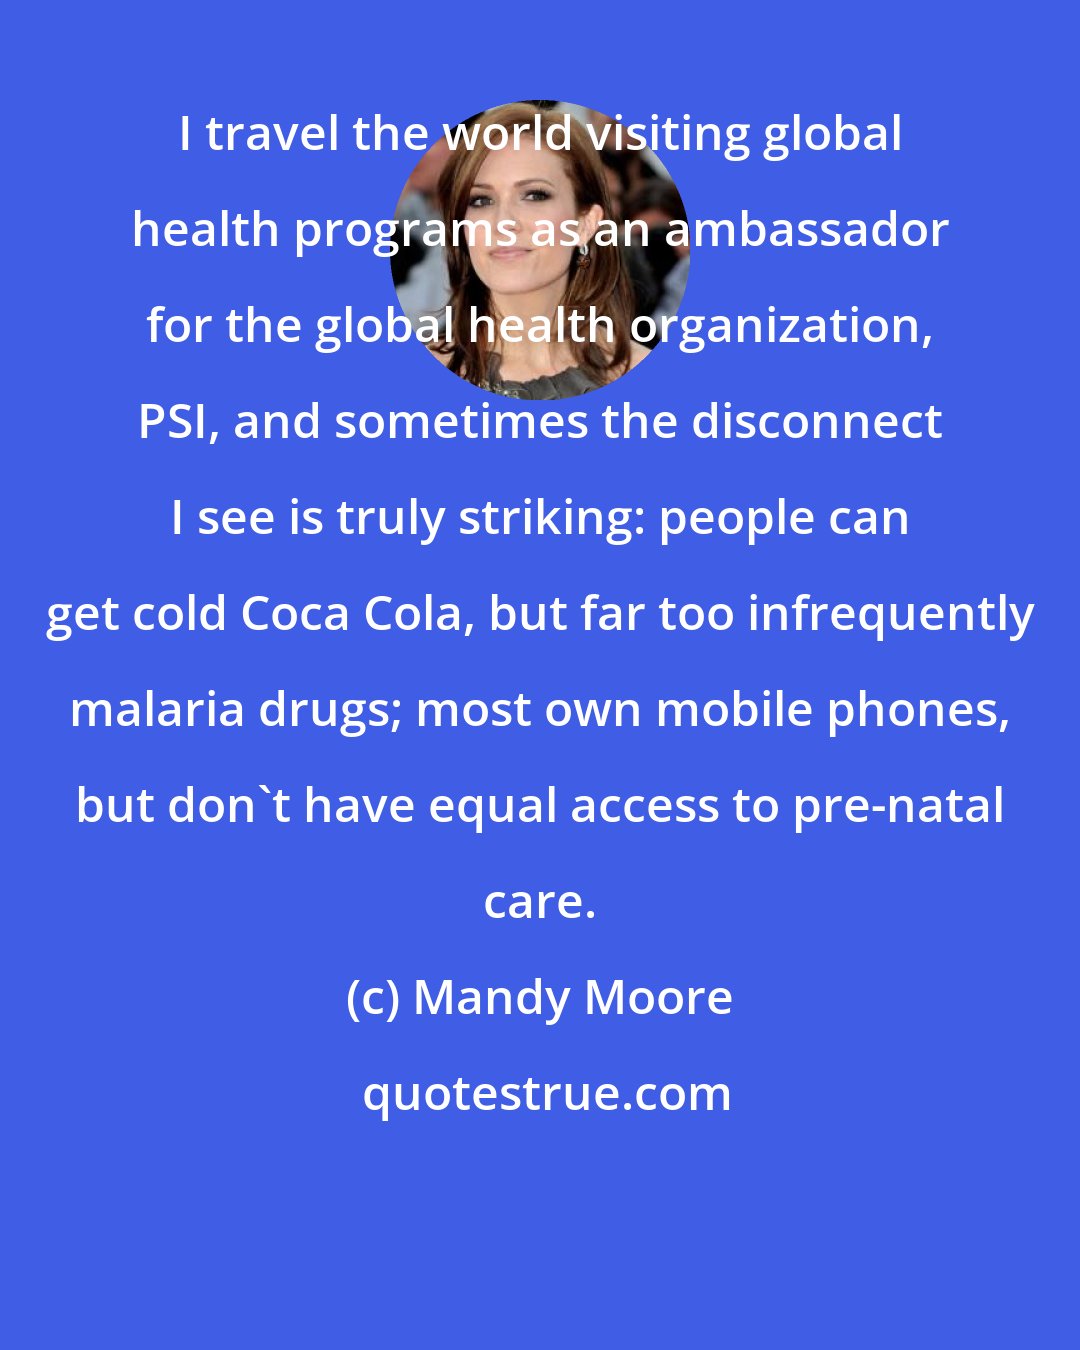 Mandy Moore: I travel the world visiting global health programs as an ambassador for the global health organization, PSI, and sometimes the disconnect I see is truly striking: people can get cold Coca Cola, but far too infrequently malaria drugs; most own mobile phones, but don't have equal access to pre-natal care.